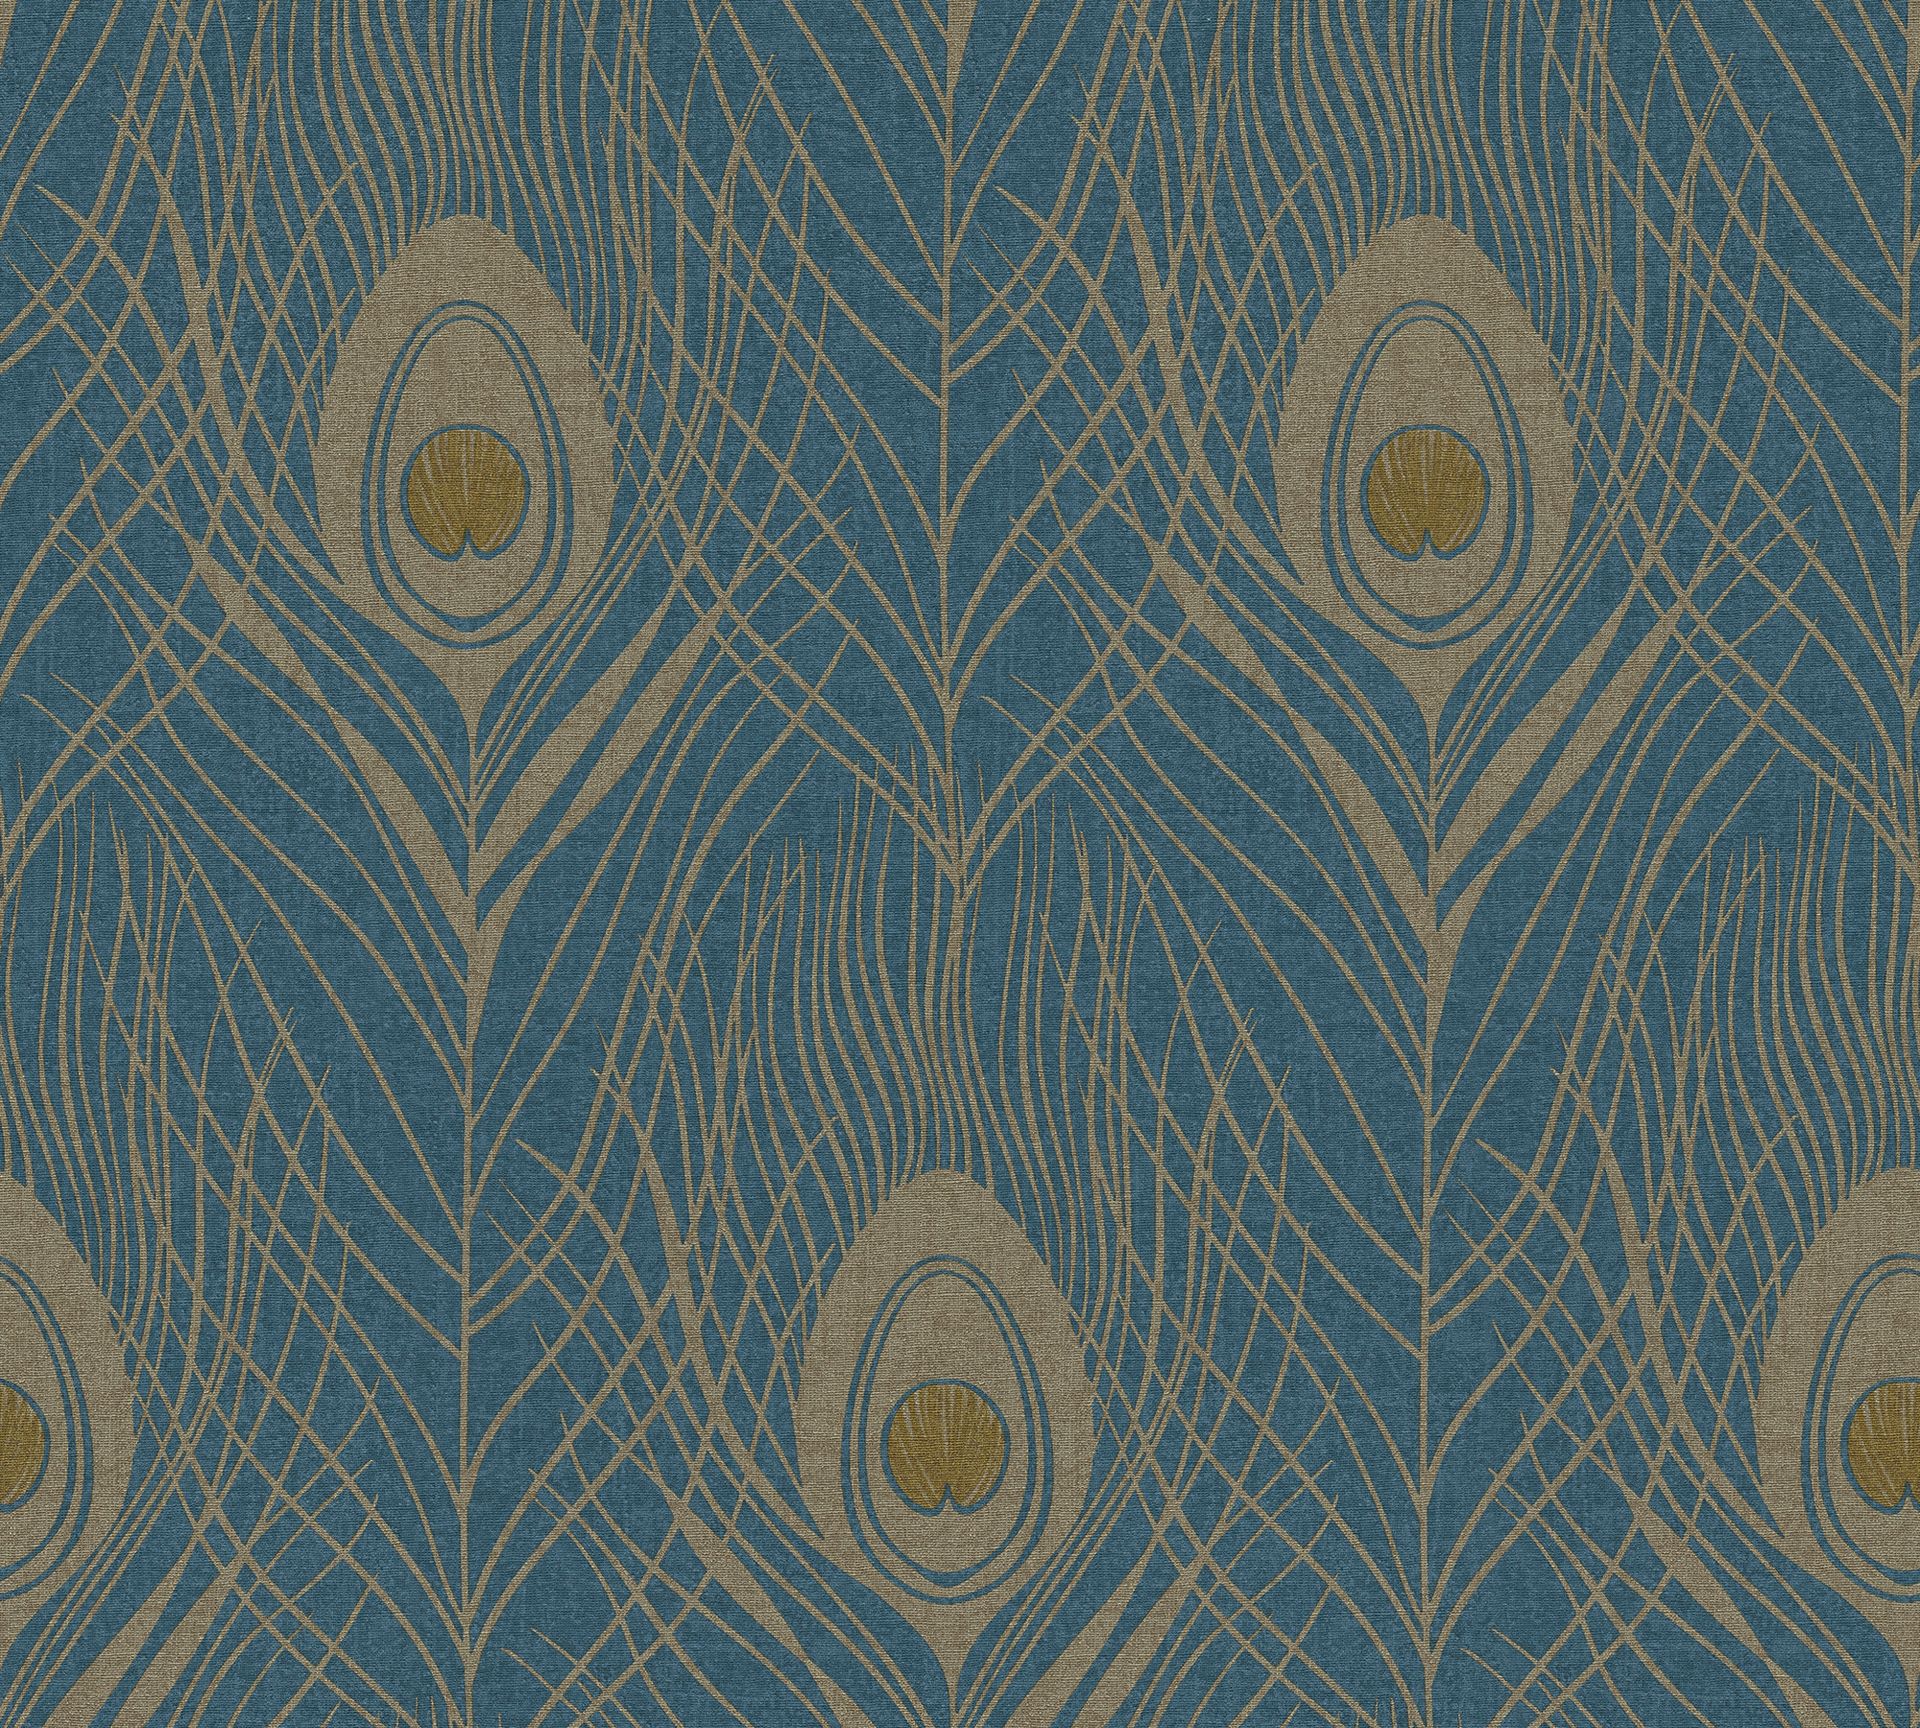 Architects Paper Absolutely Chic, Tapete mit Federn, blau, gold 369712